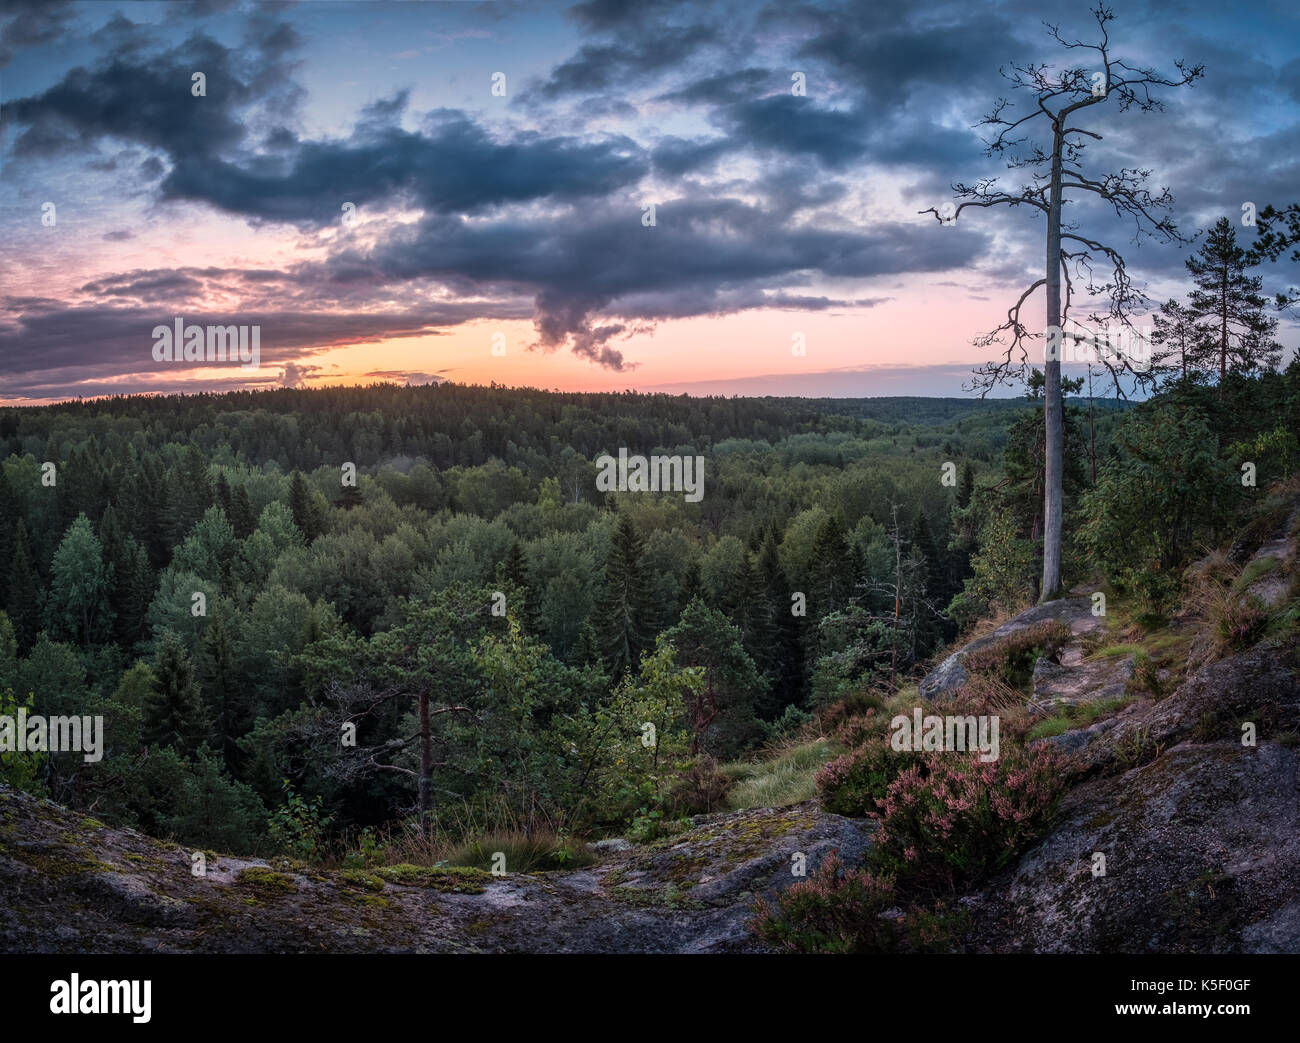 Scenic landscape with sunrise and forest at early morning in National Park Nuuksio, Finland Stock Photo